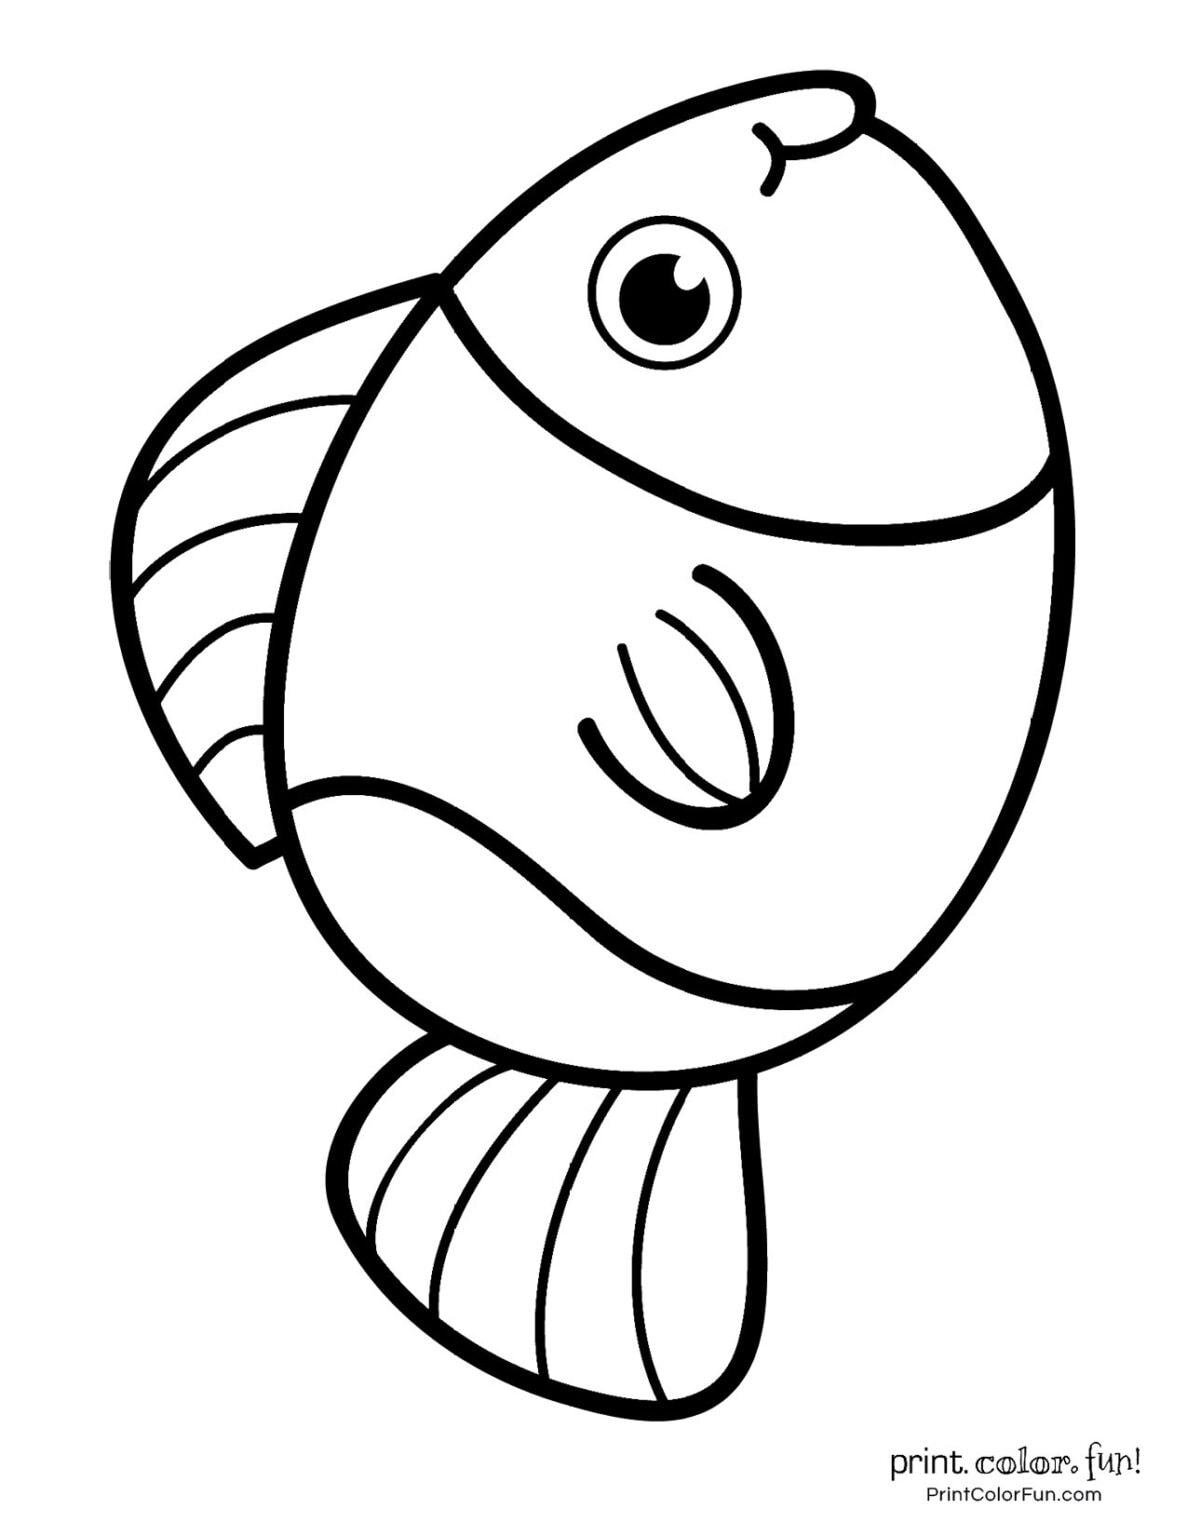 Top 100 fish coloring pages: Cute free printables - Print Color Fun!